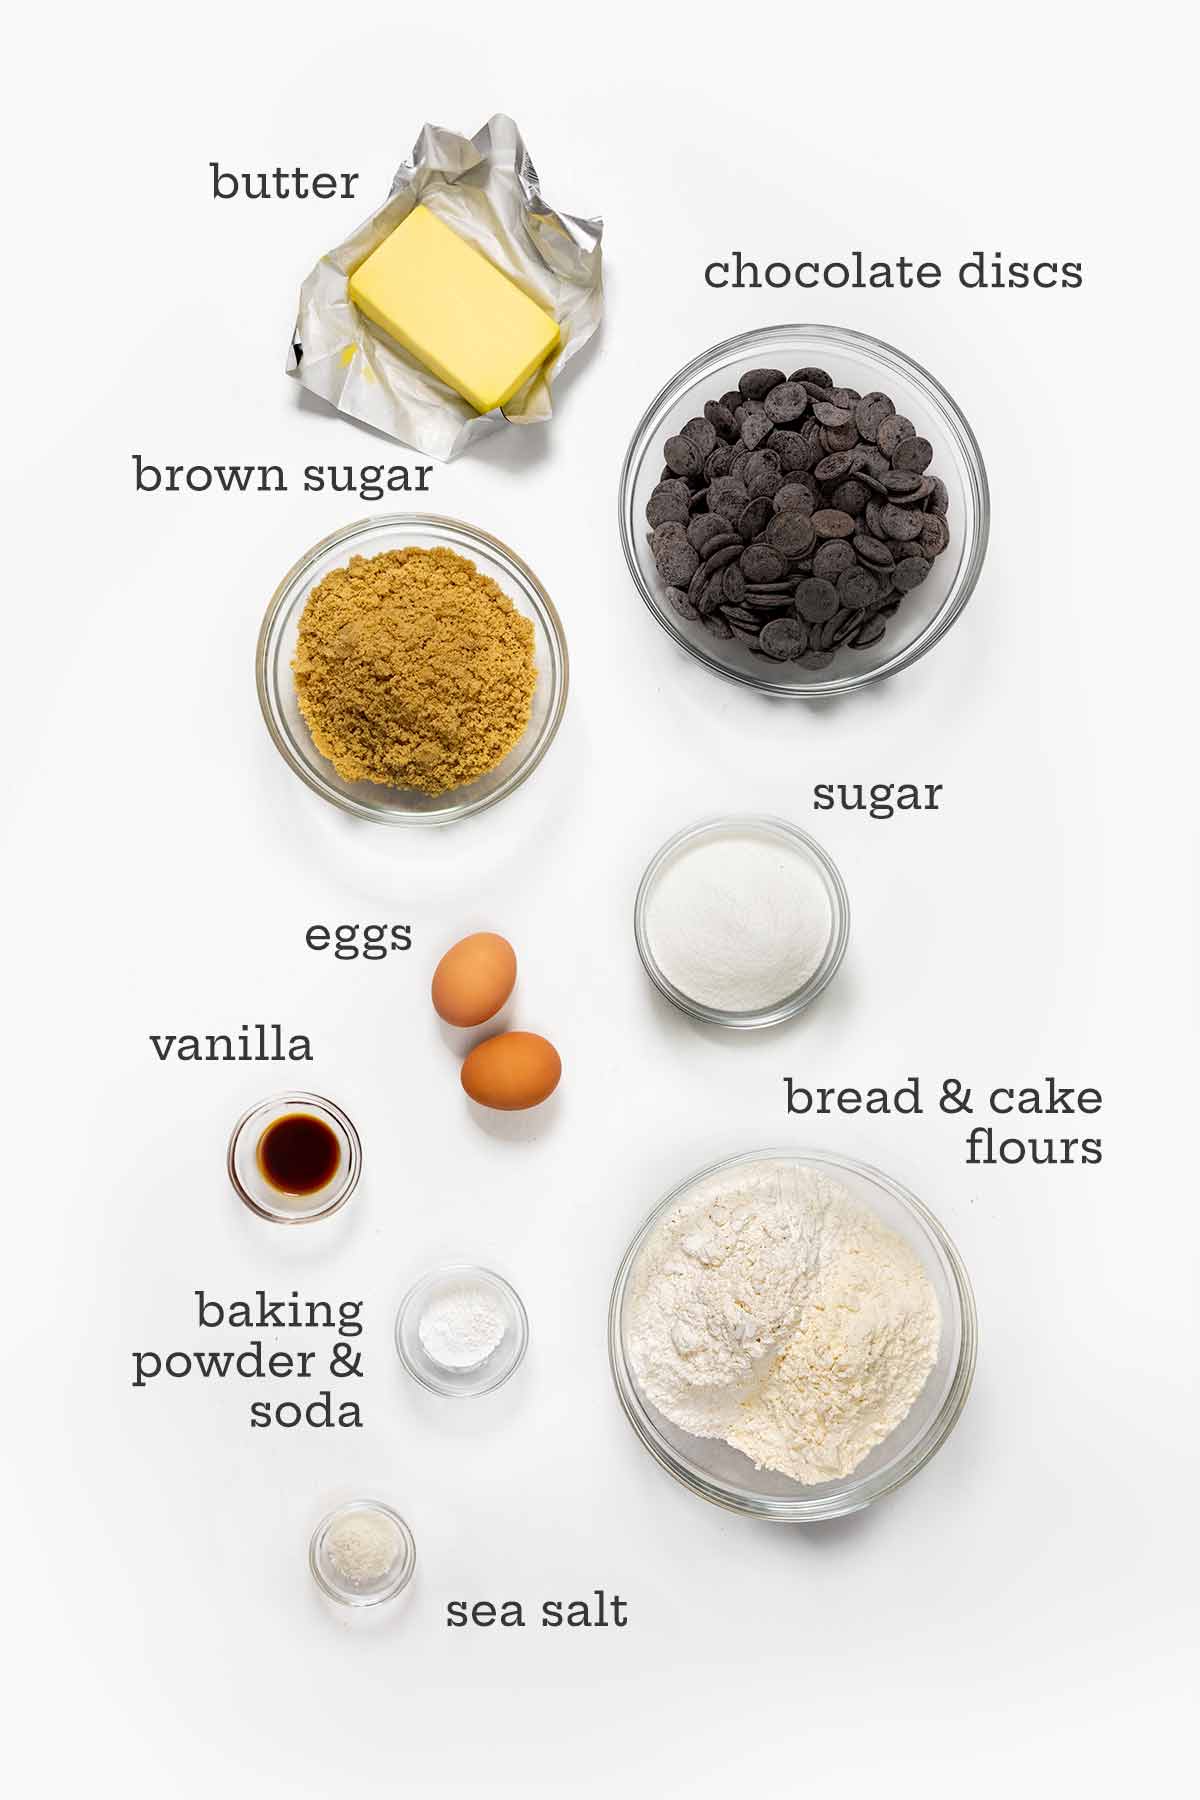 Ingredients for New York Times' chocolate chip cookies--sugars, flours, butter, chocolate discs, eggs, vanilla, salt, and baking soda and powder.